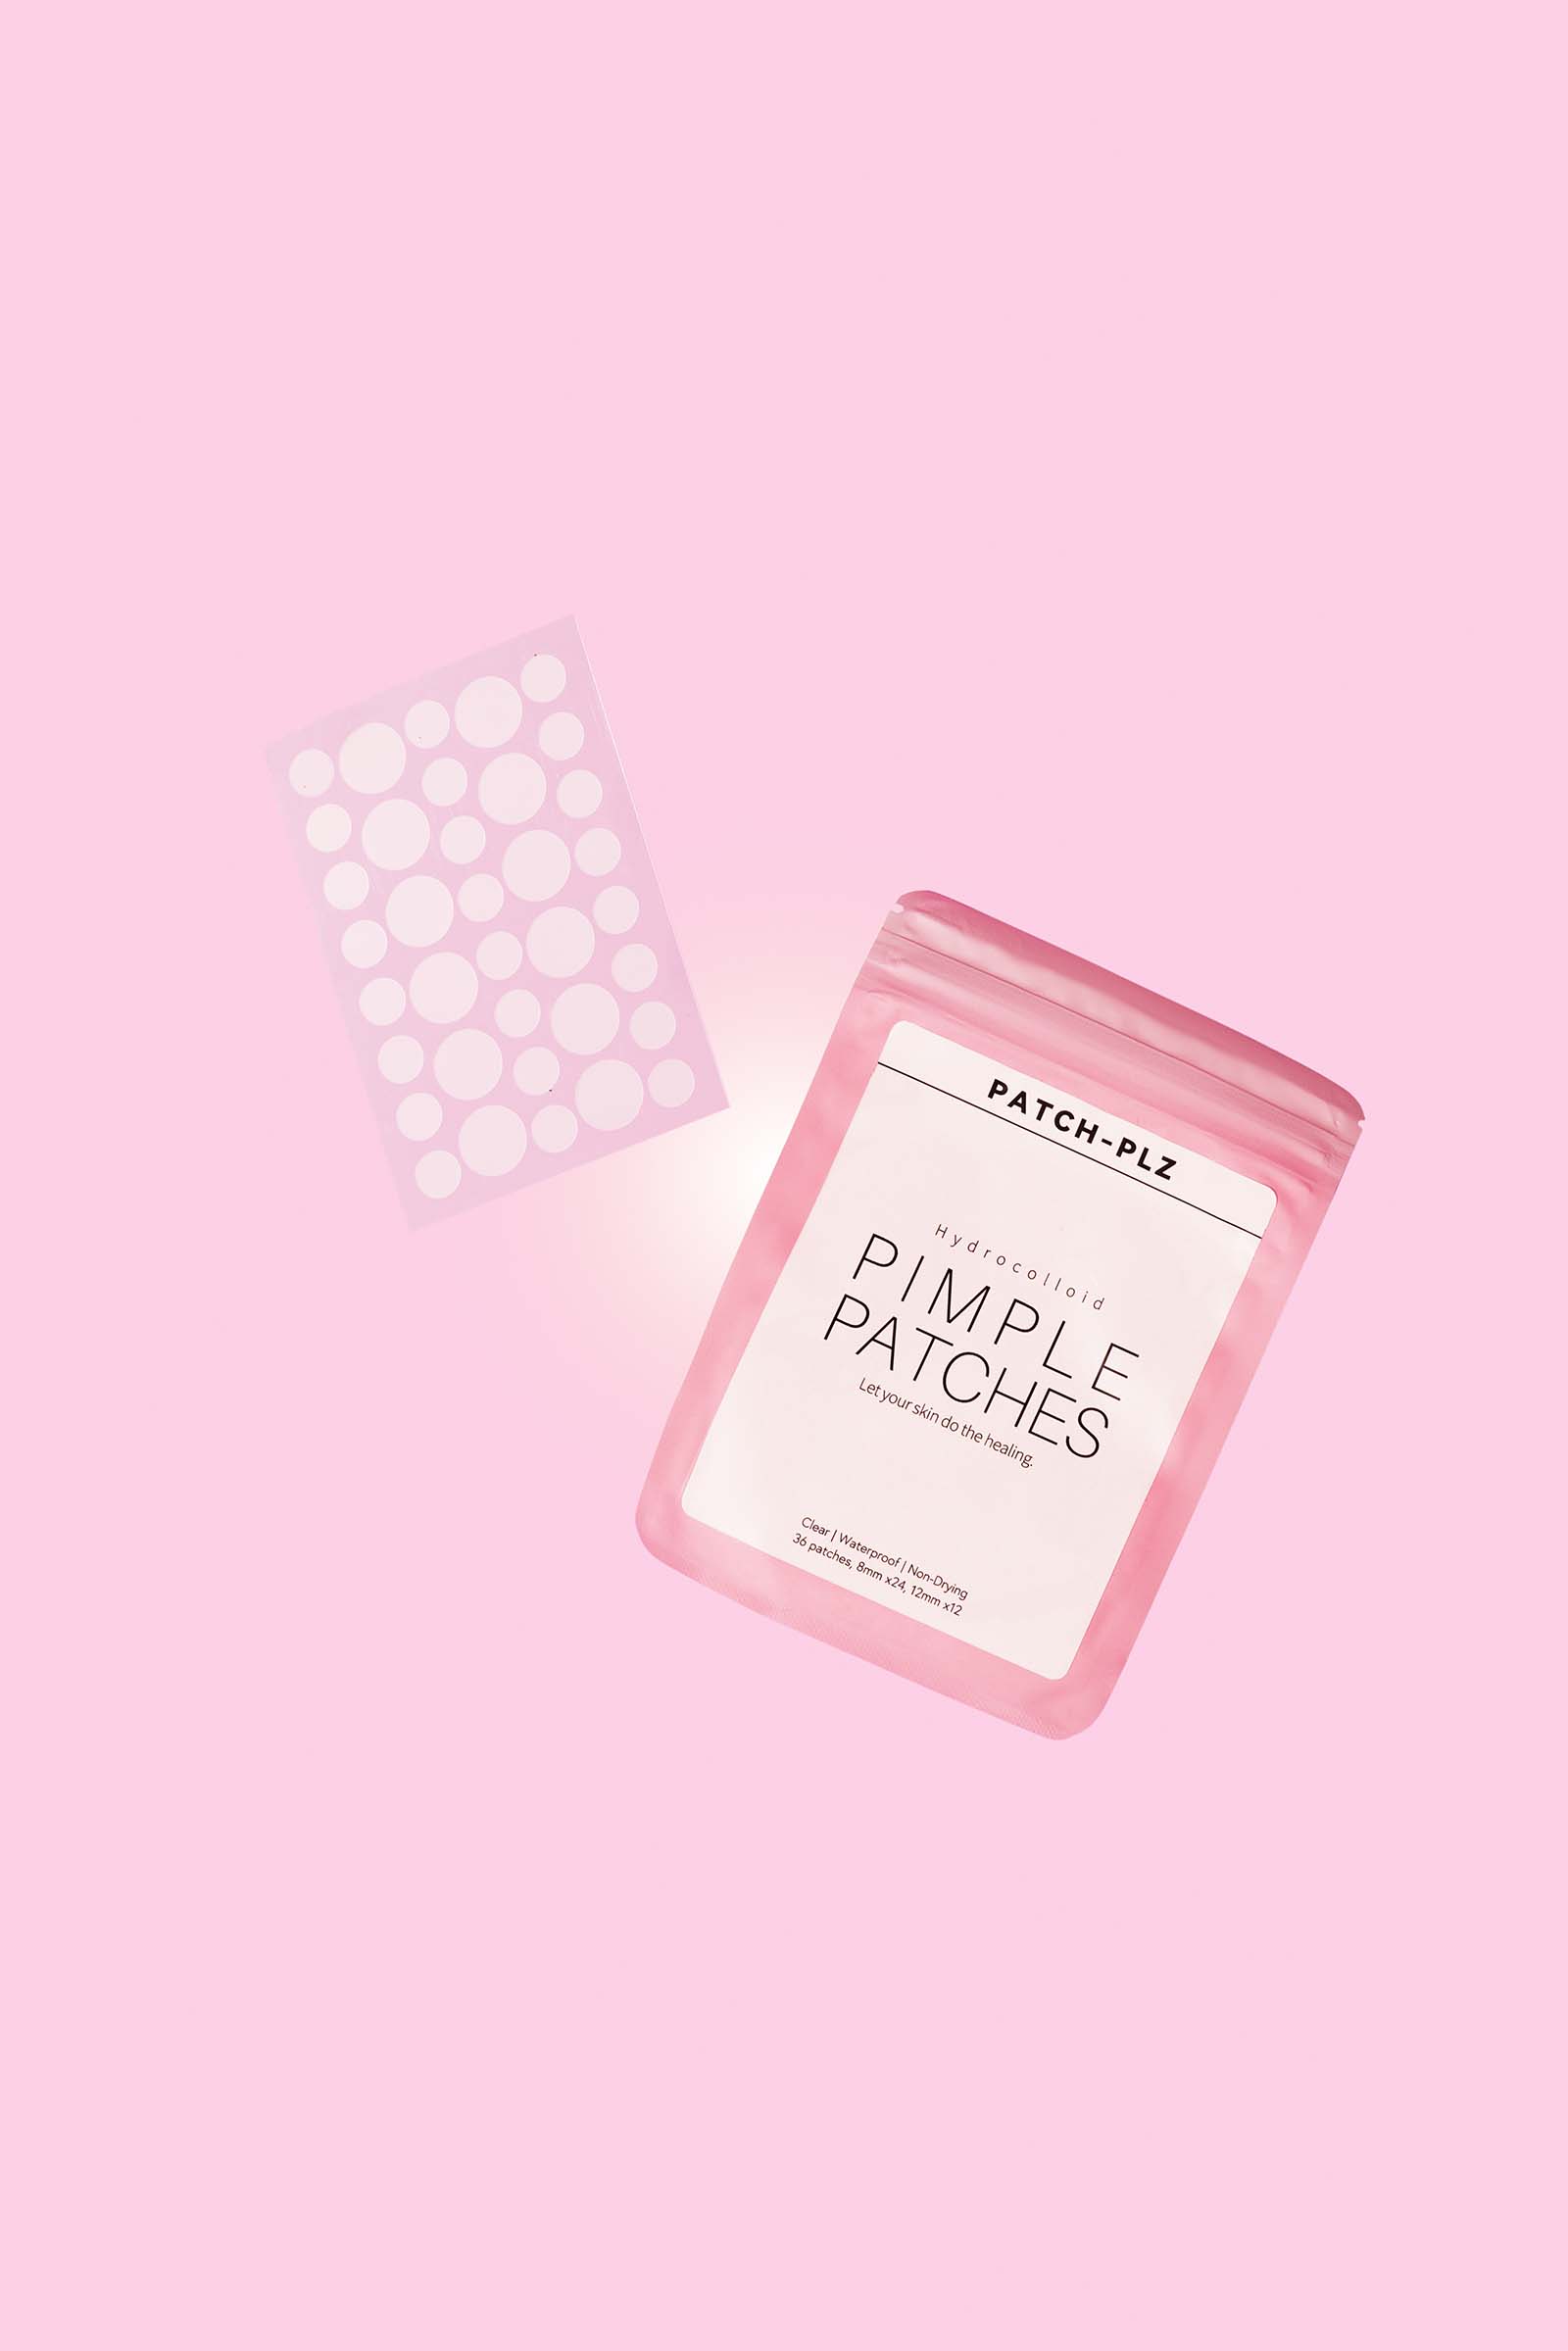 Patch Plz's pink pimple patches take center stage in dreamy product photography by Colourpop Studio